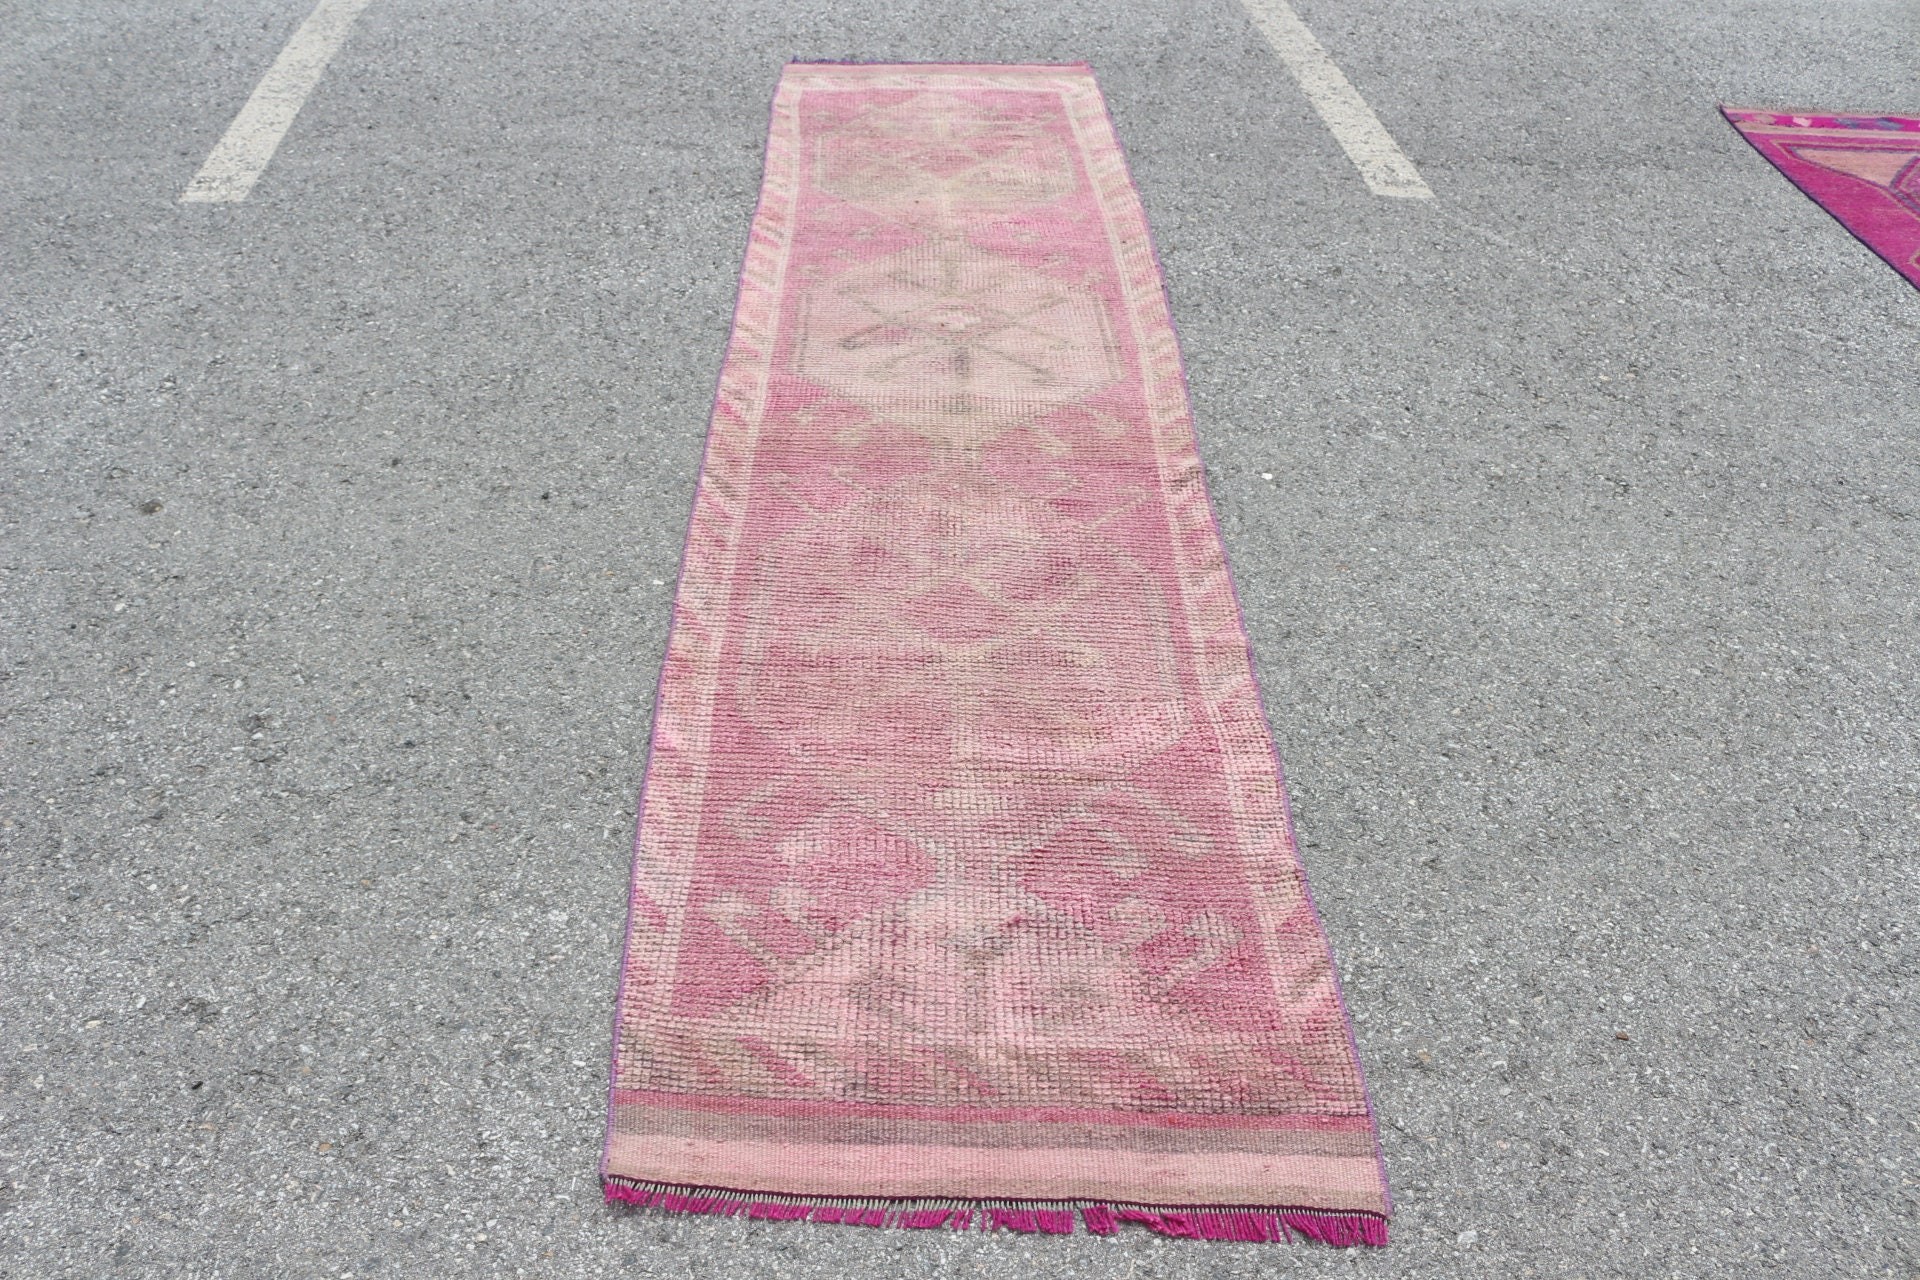 Cute Rugs, 2.5x10.6 ft Runner Rugs, Hand Knotted Rug, Kitchen Rugs, Cool Rugs, Pink Antique Rug, Turkish Rugs, Rugs for Runner, Vintage Rug